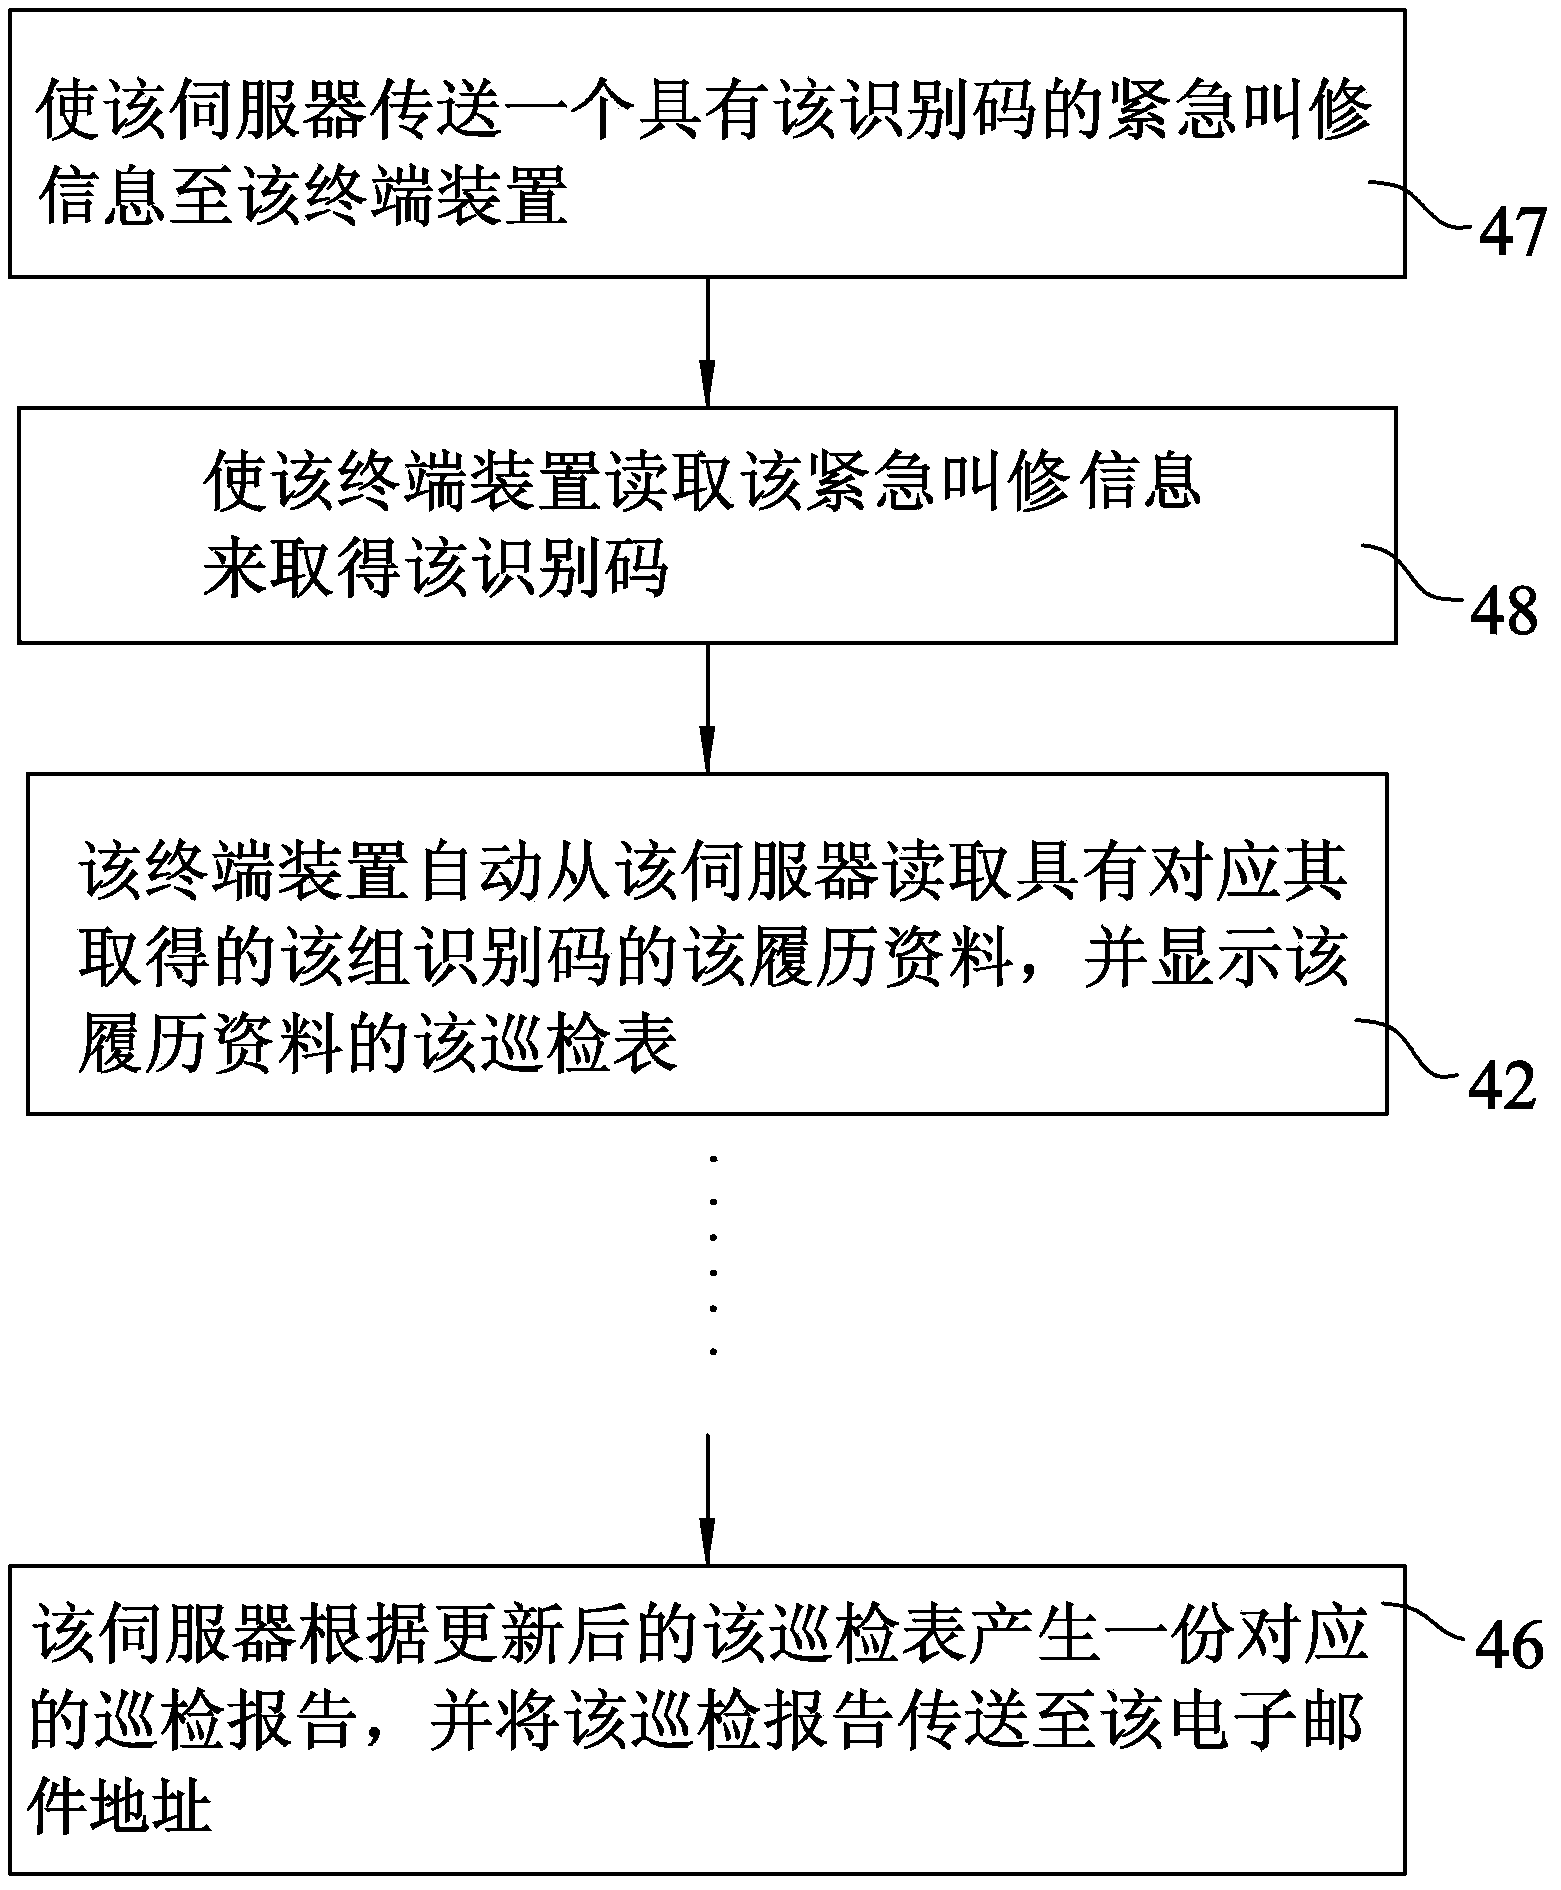 Plant inspection method and system